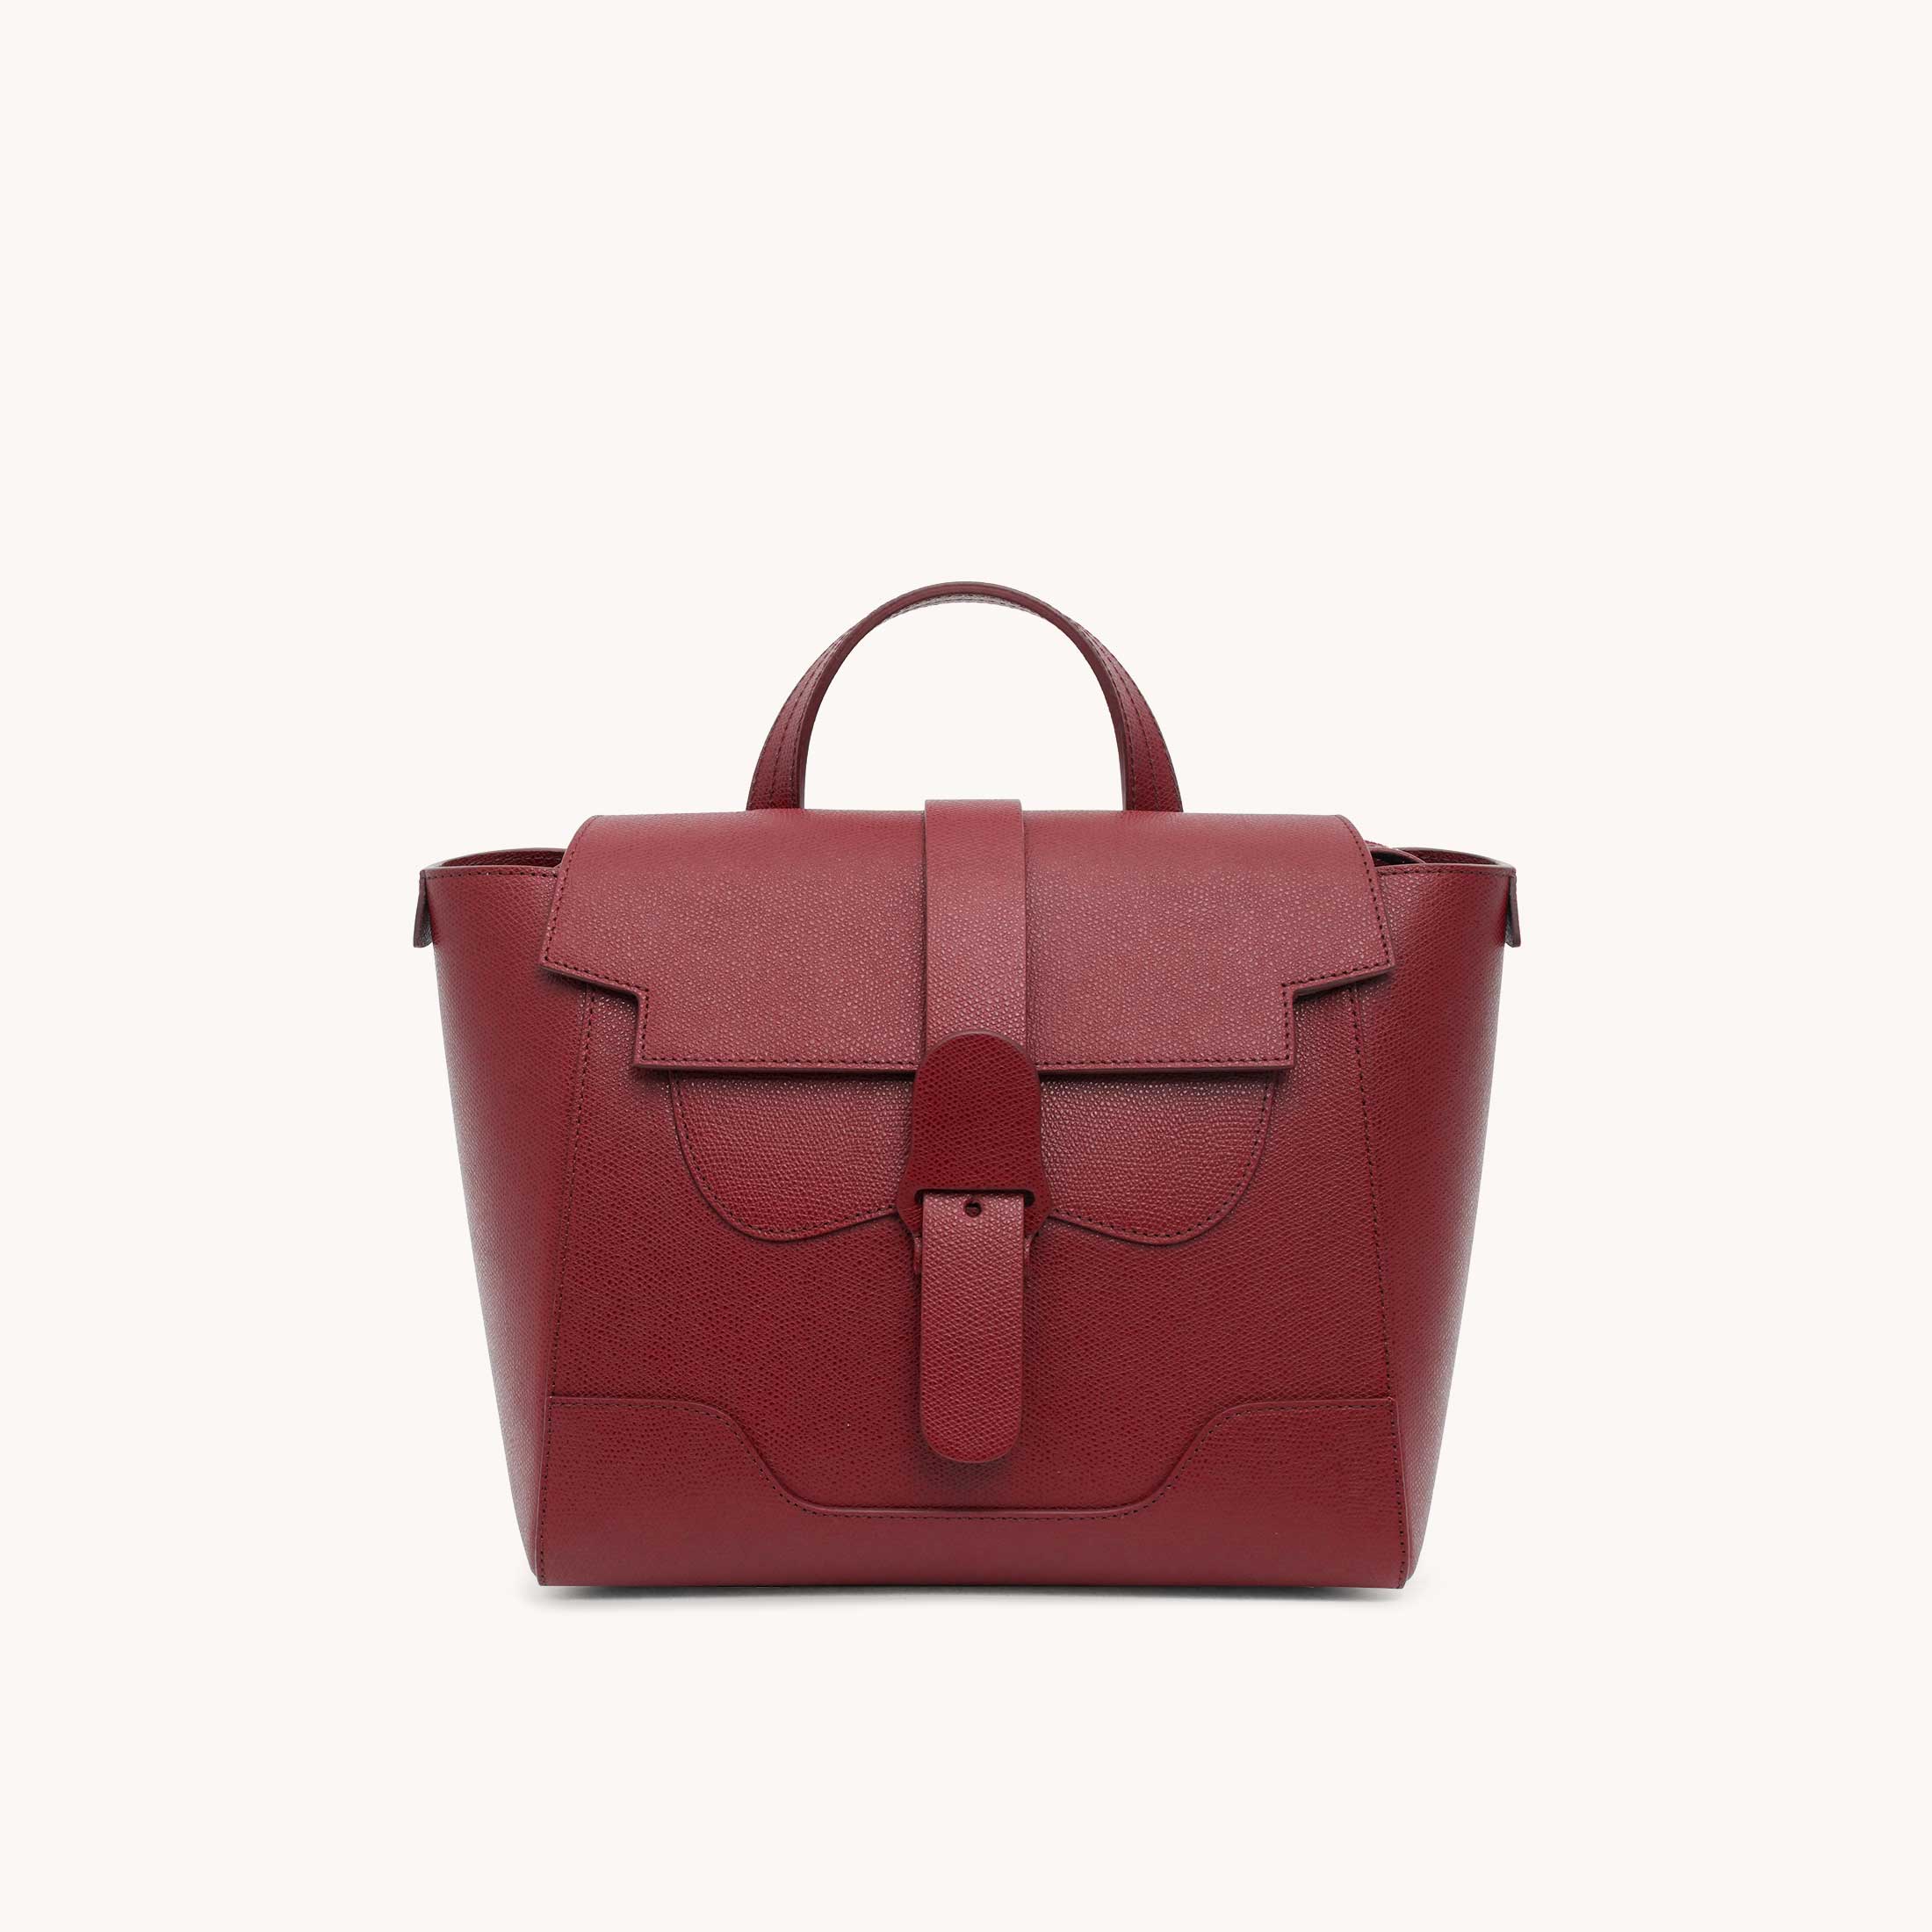 Midi Maestra Bag Pebbled Merlot with Gold Hardware Front View